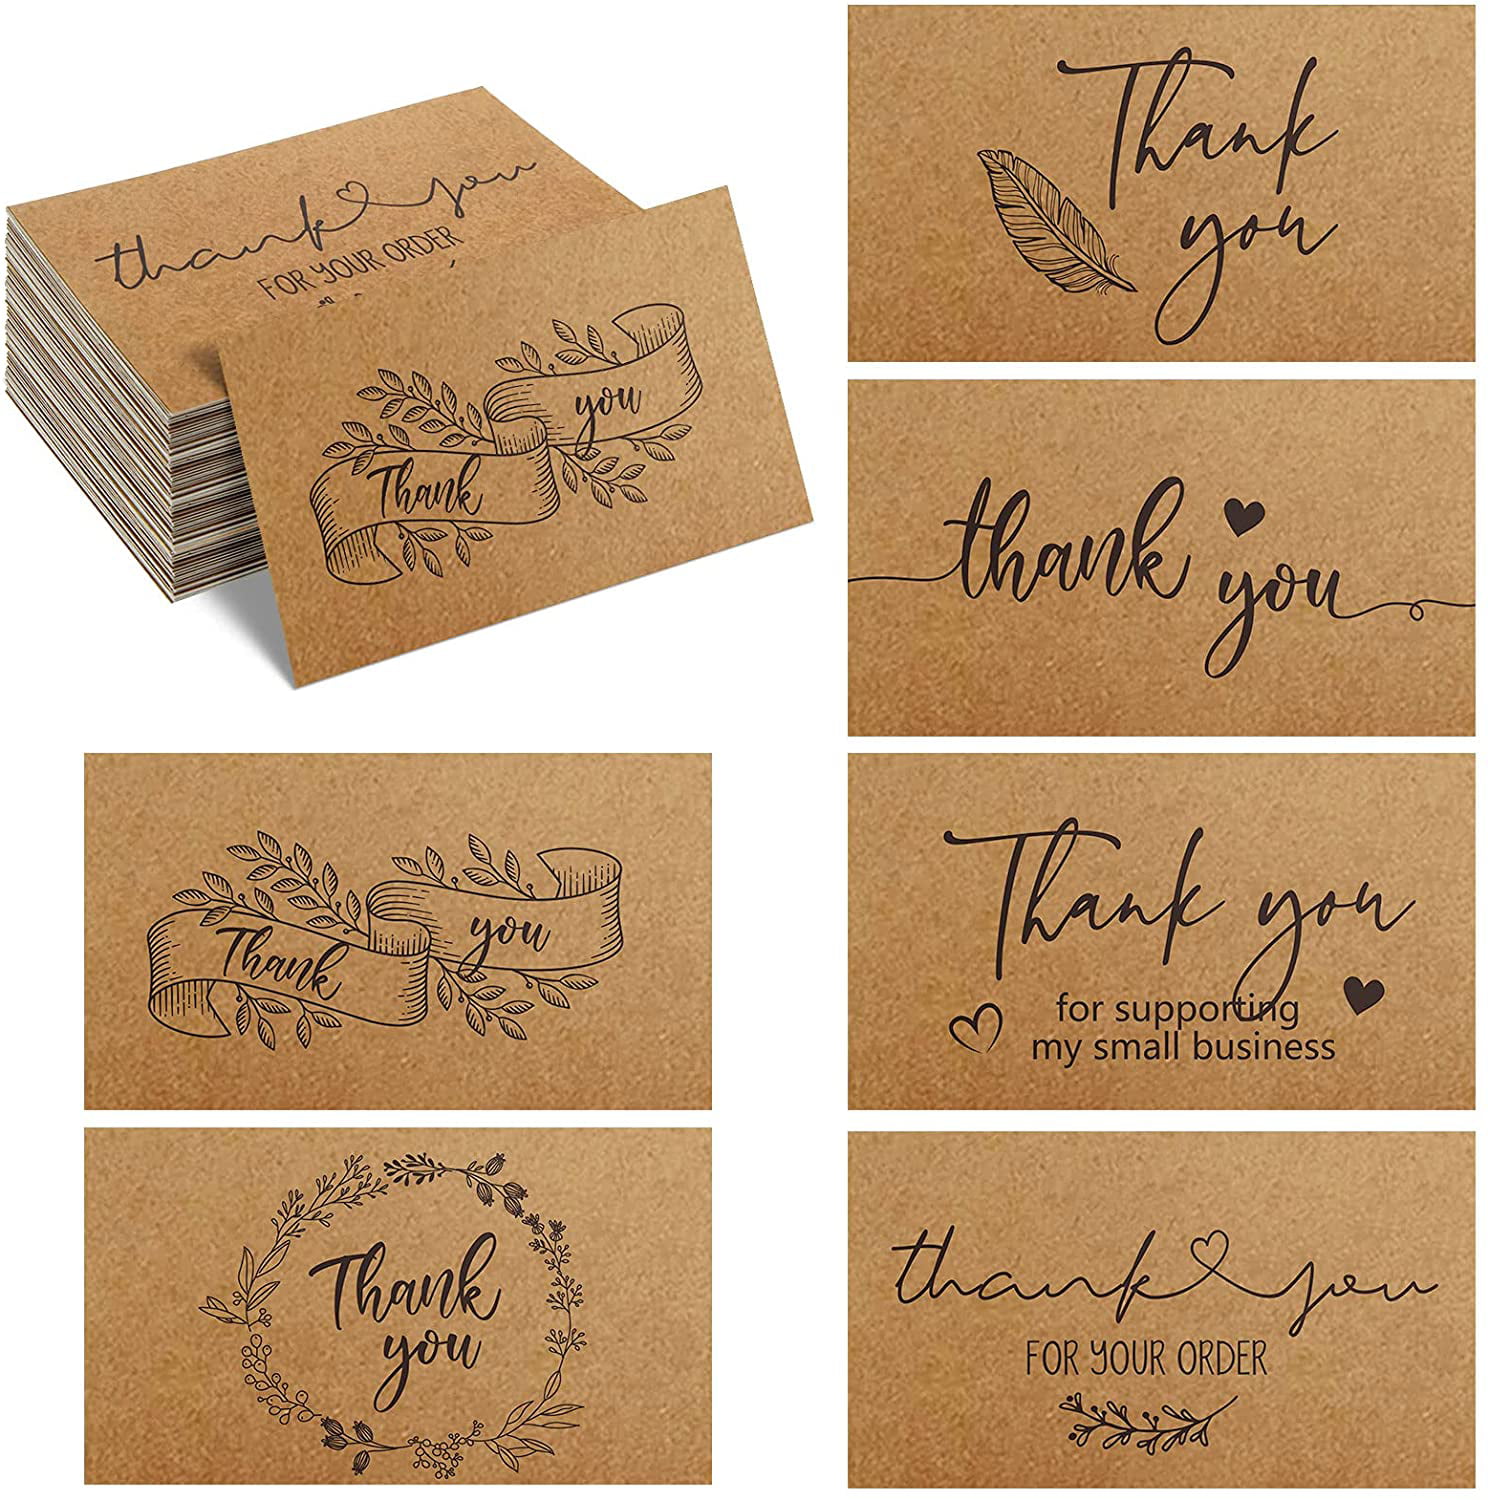 Mystical Branding Thank You For Your Order Cards Recycled & Recyclable. Magical Business Cards